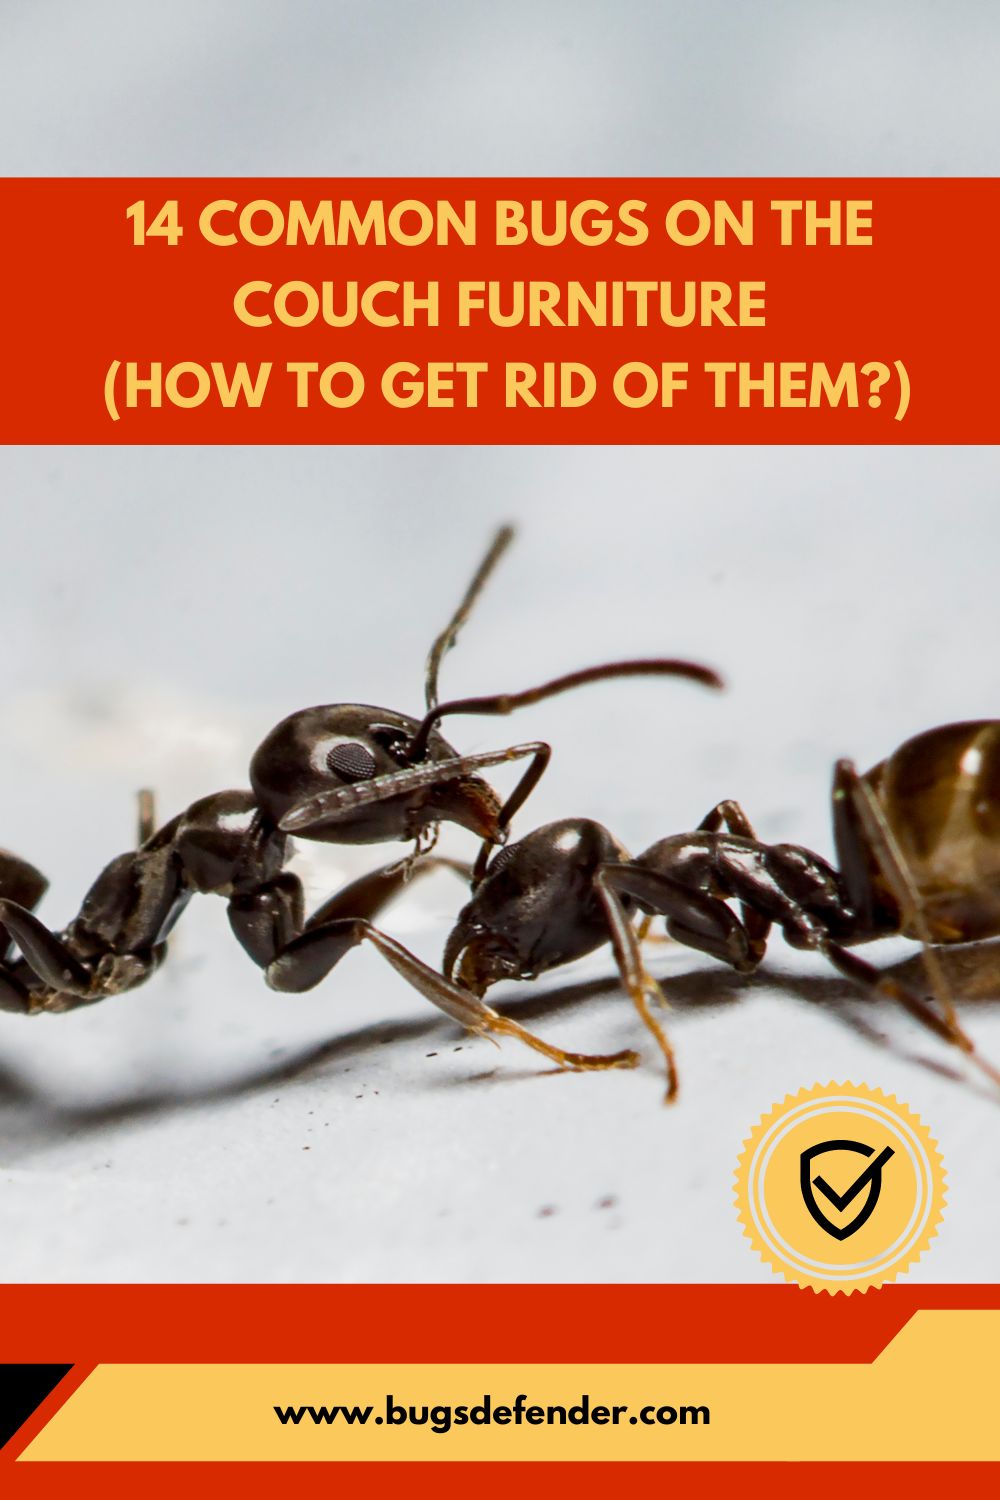 14 Common Bugs on the Couch Furniture pin1